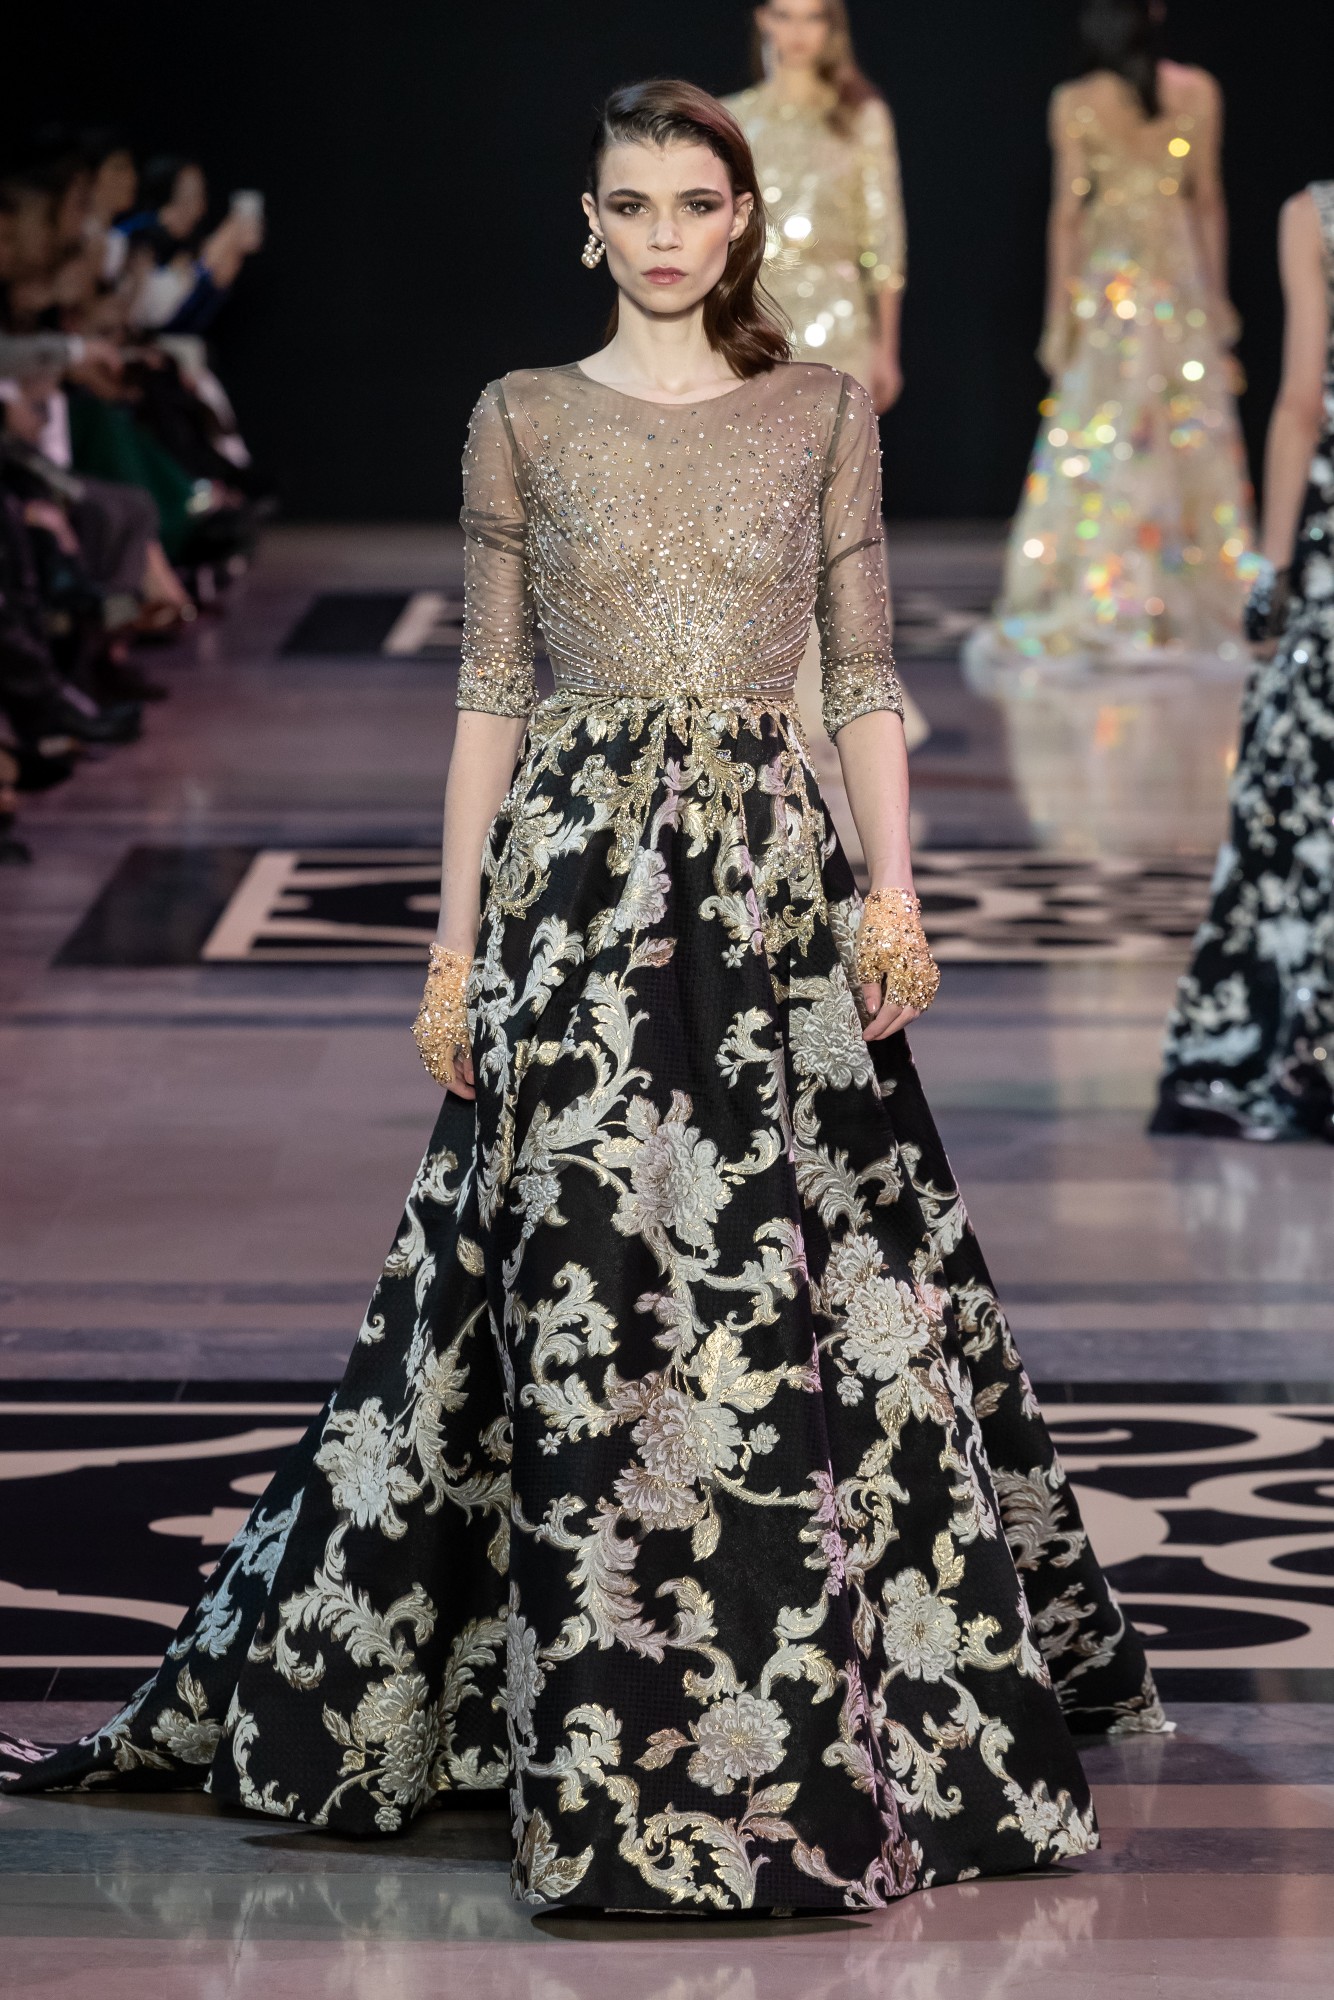 Spring 2019 Haute Couture: Georges Hobeika takes on Versailles ...